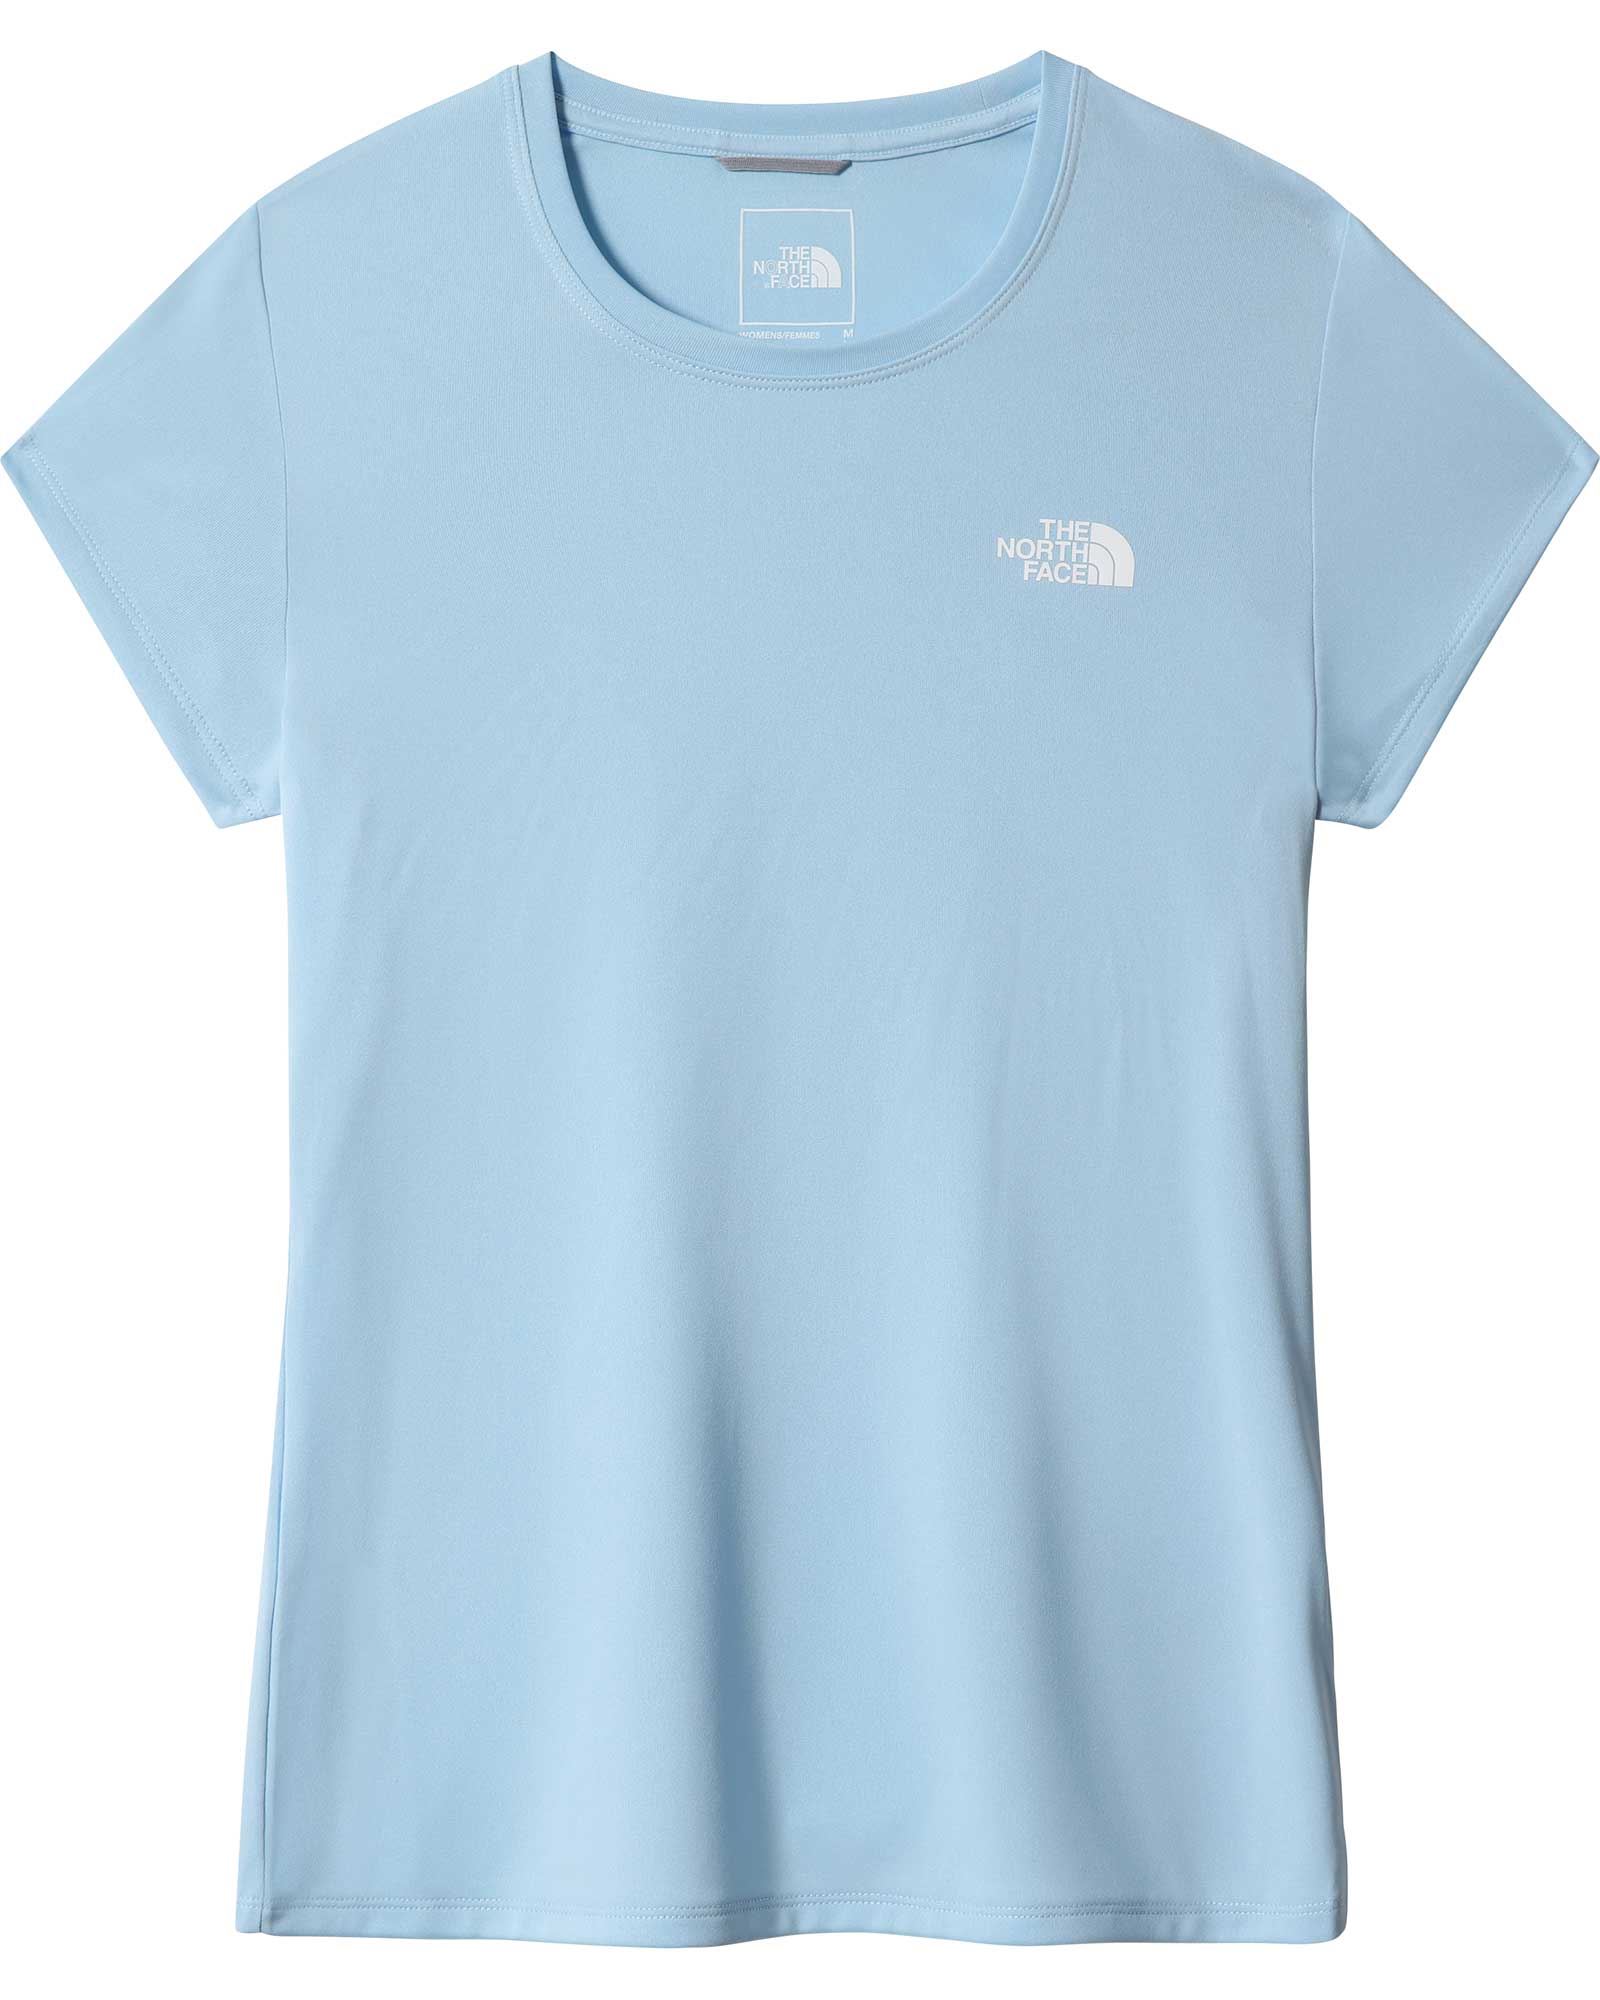 Product image of The North Face Reaxion Amp Women's Crew